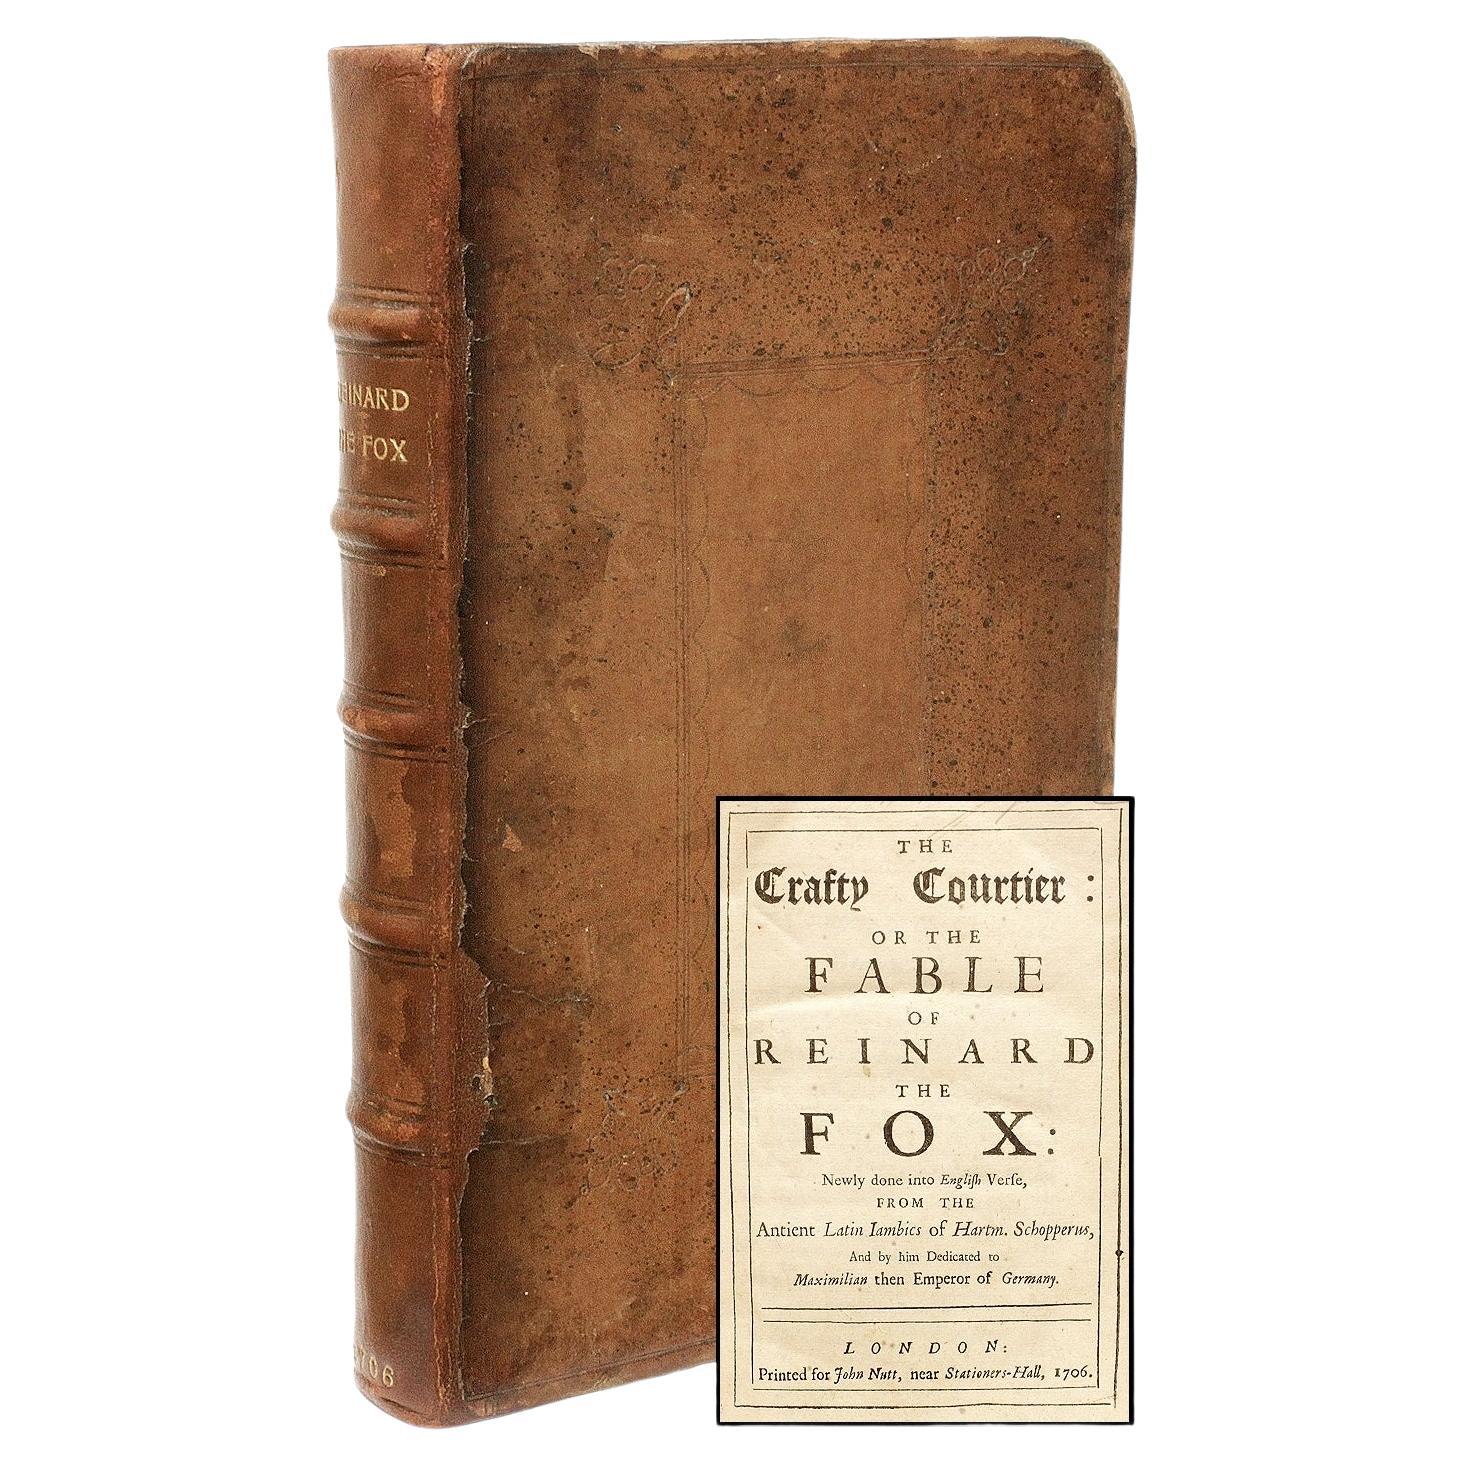 (NIVARDUS) - The Crafty Courtier: Or the fable of Reinard the Fox - 1706